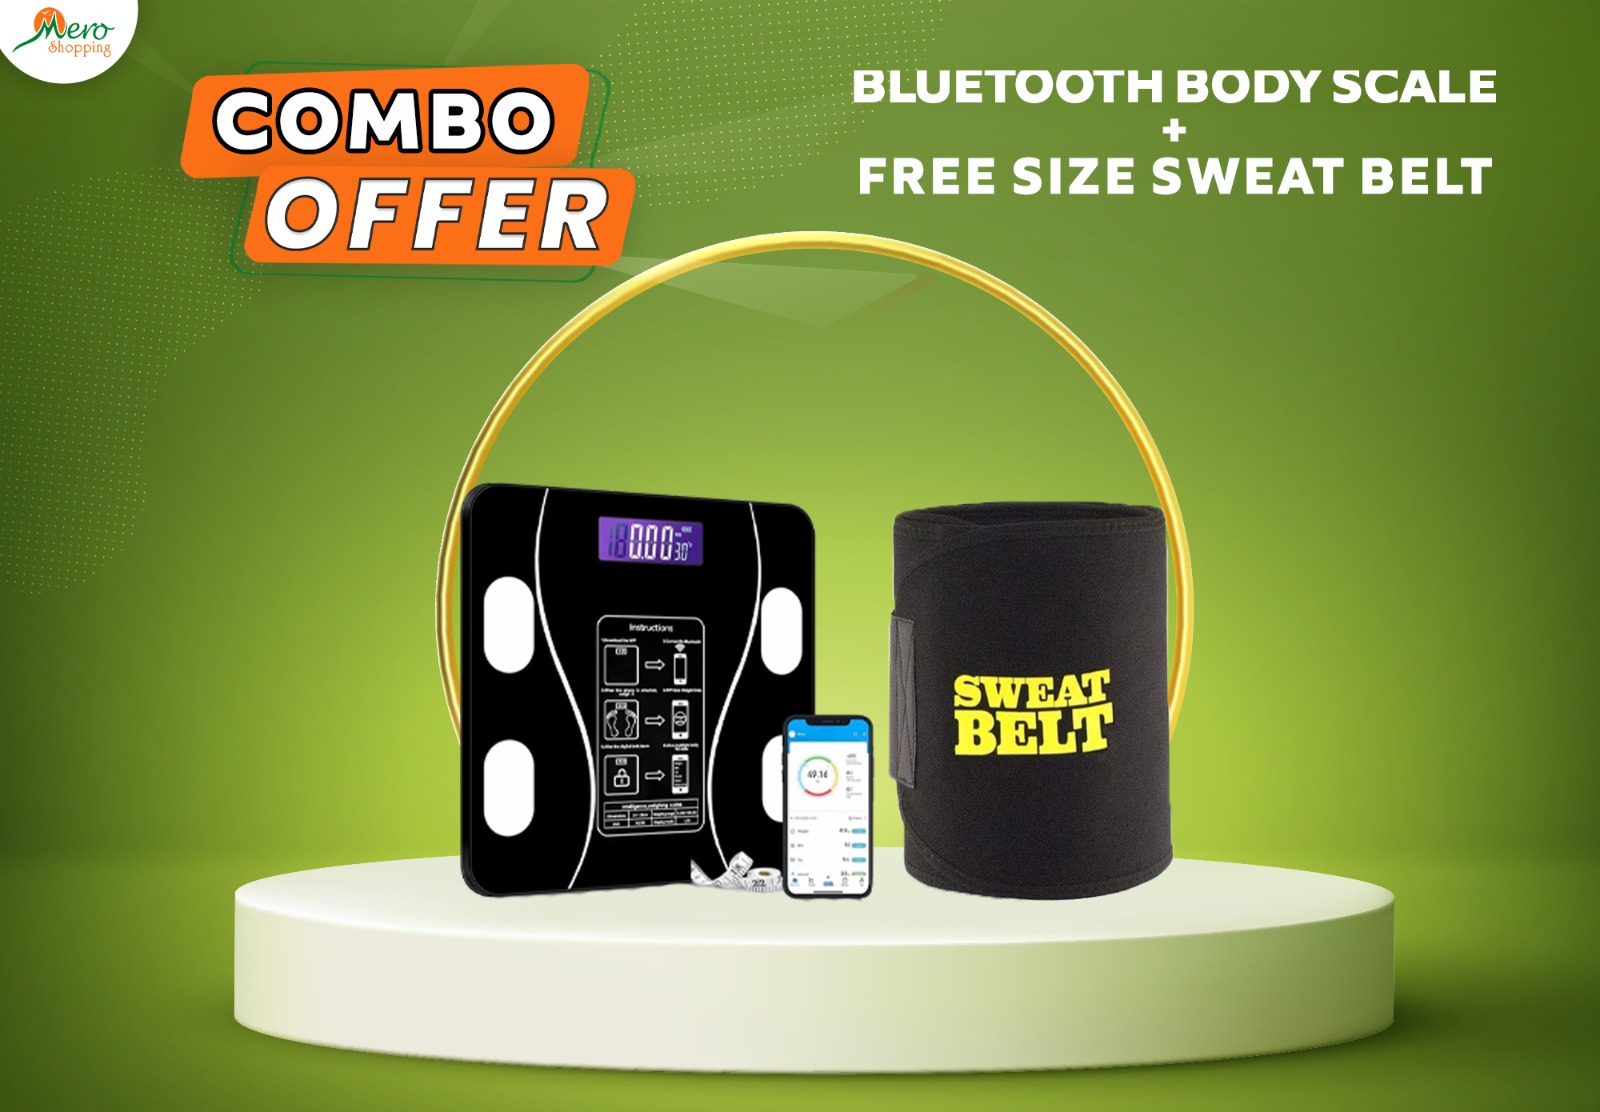 Bluetooth Scale and Sweat Belt Combo